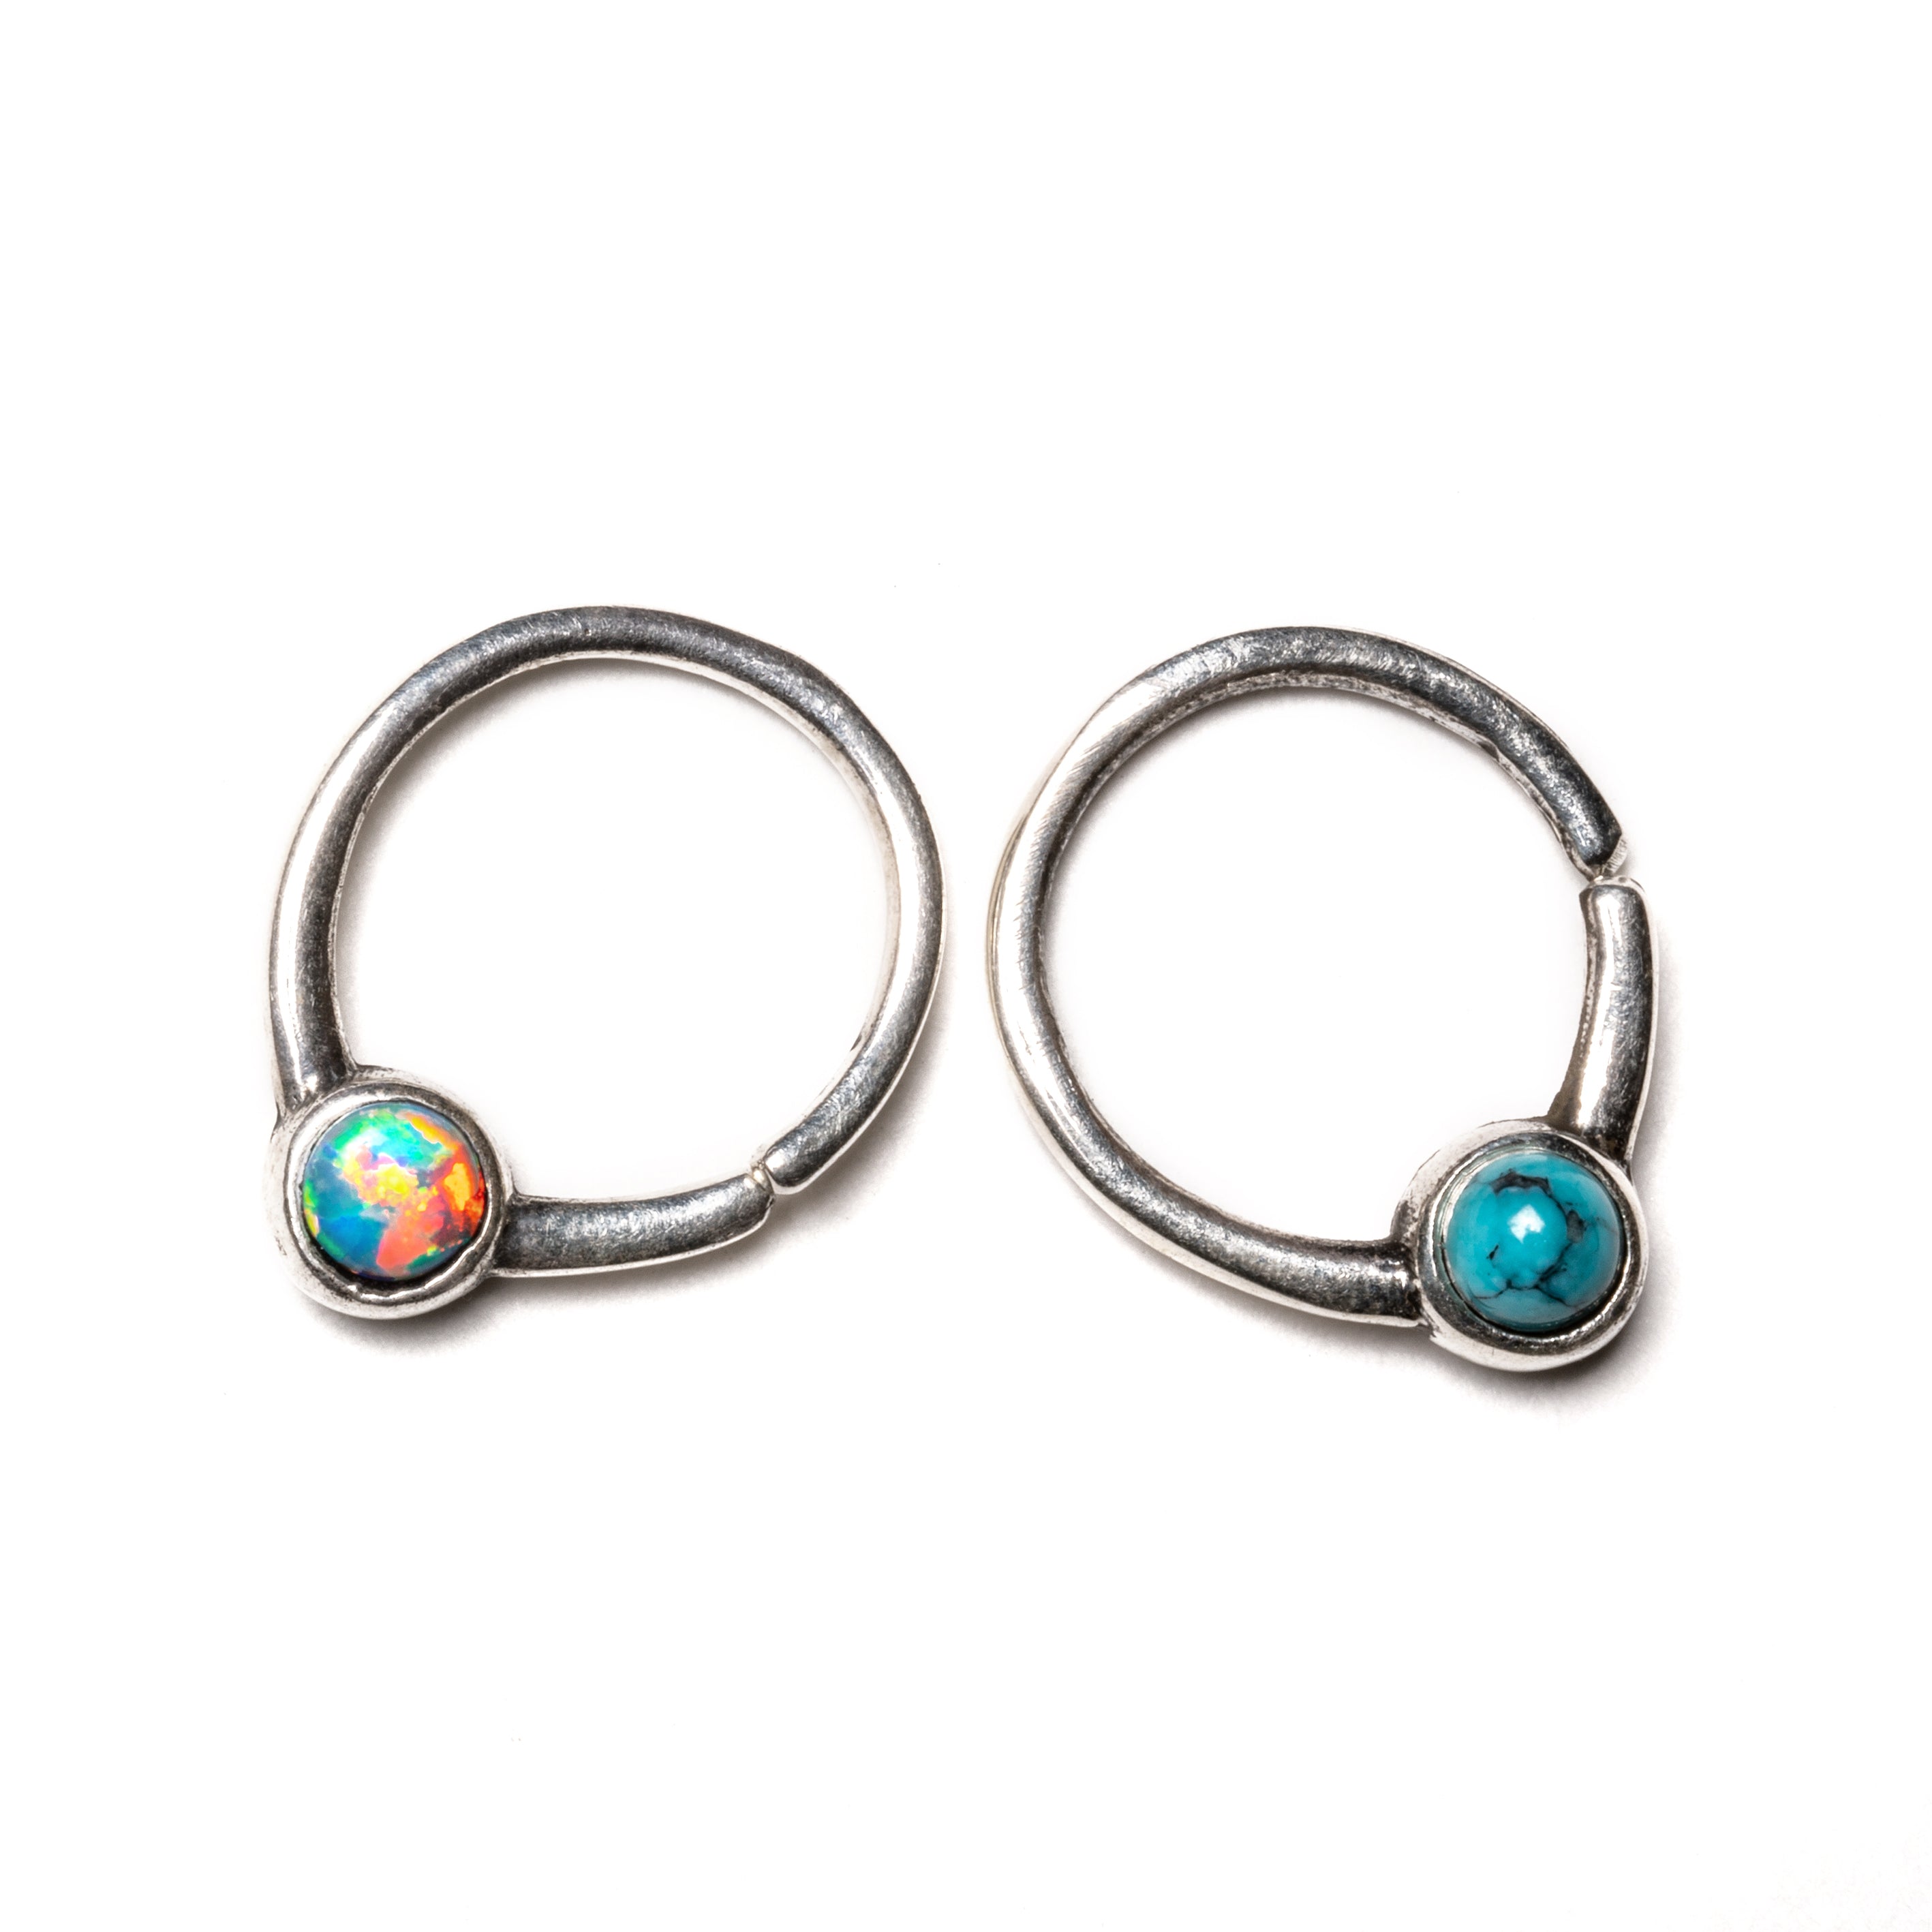 Devika silver septum rings with Turquoise, opal frontal view